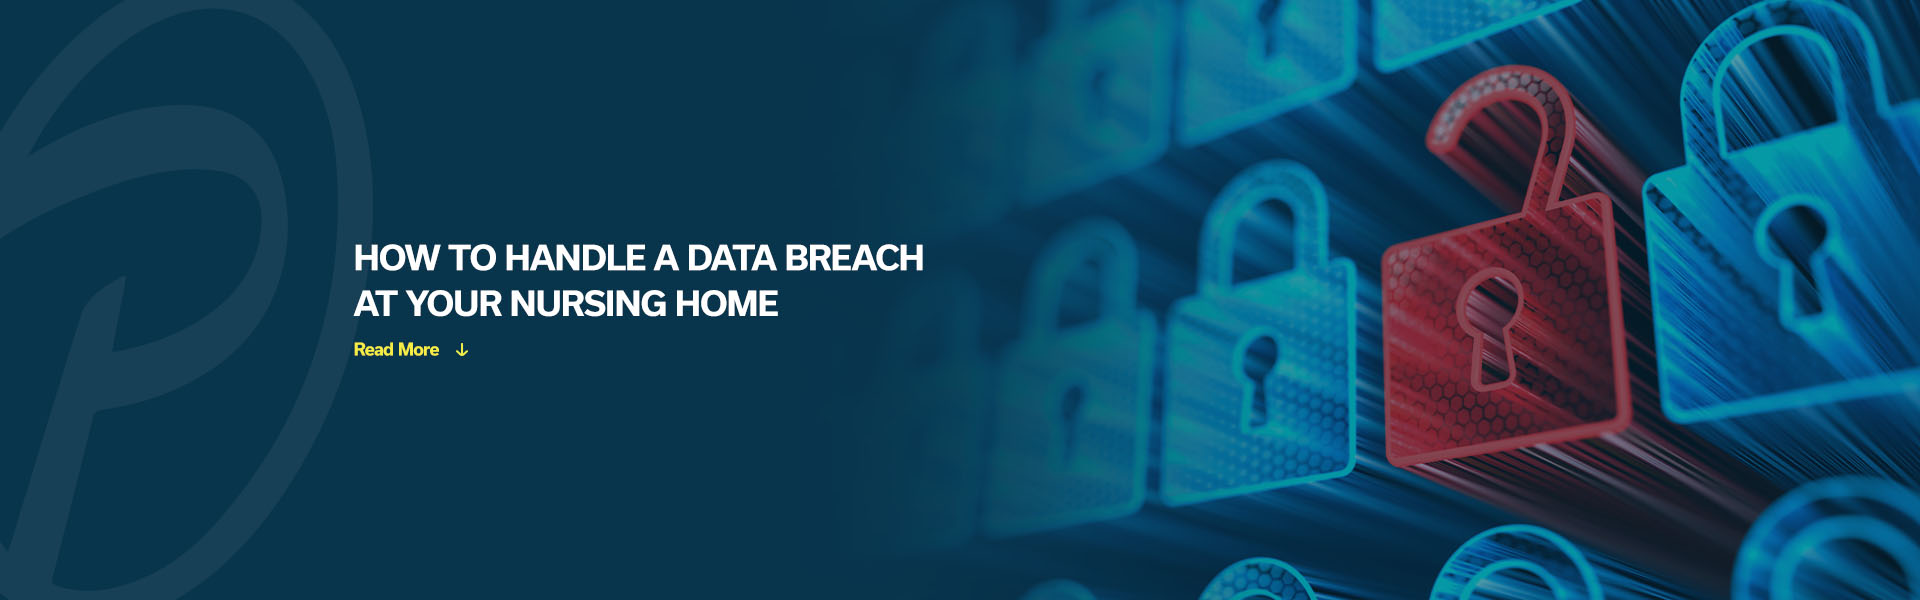 04-how-to-handle-a-data-breach-at-your-nursing-home